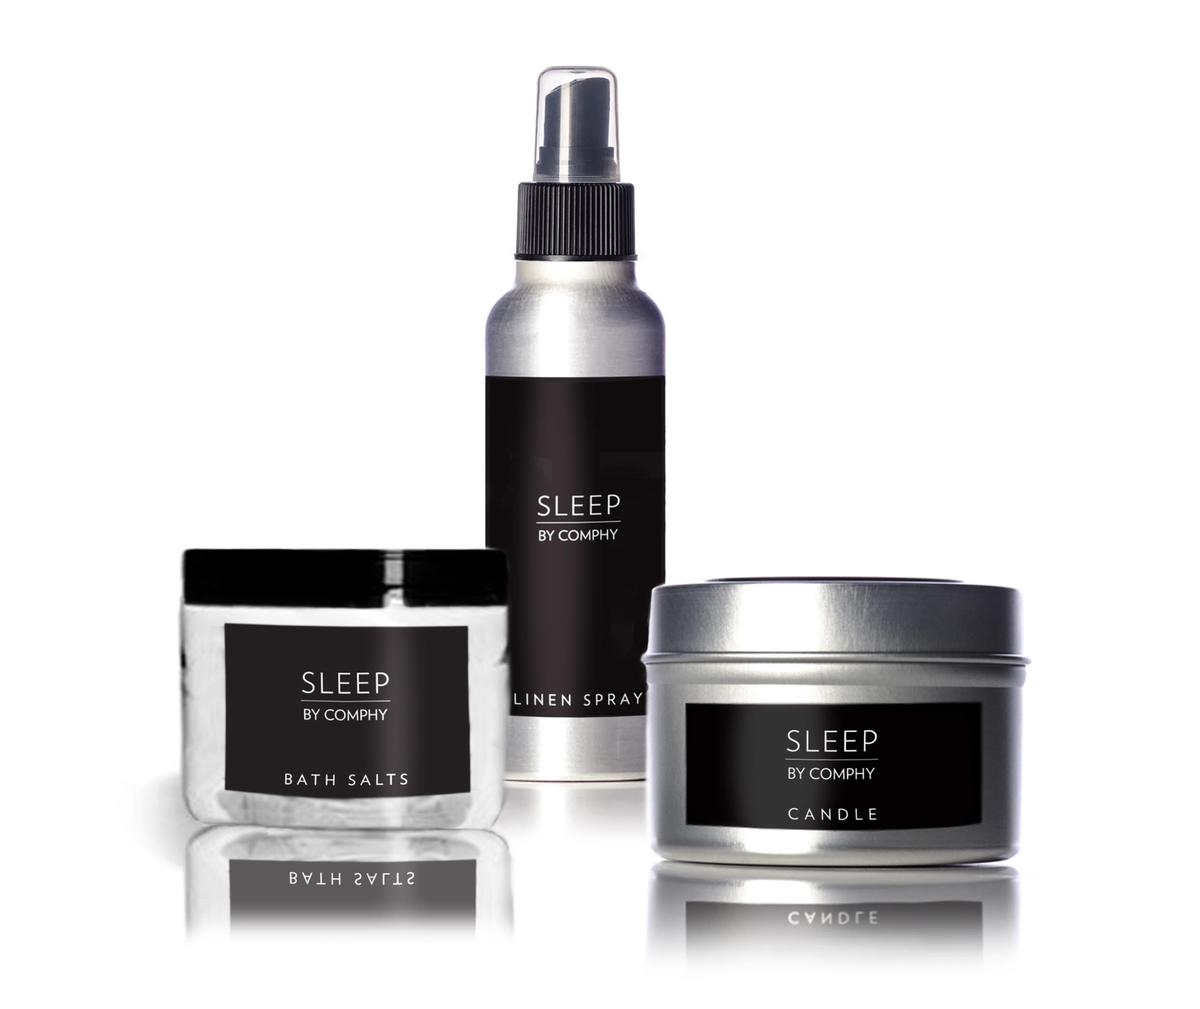 The package is suitable for retail, as a gift with sleep treatment or as a room amenity to connect the hotel and spa. / 